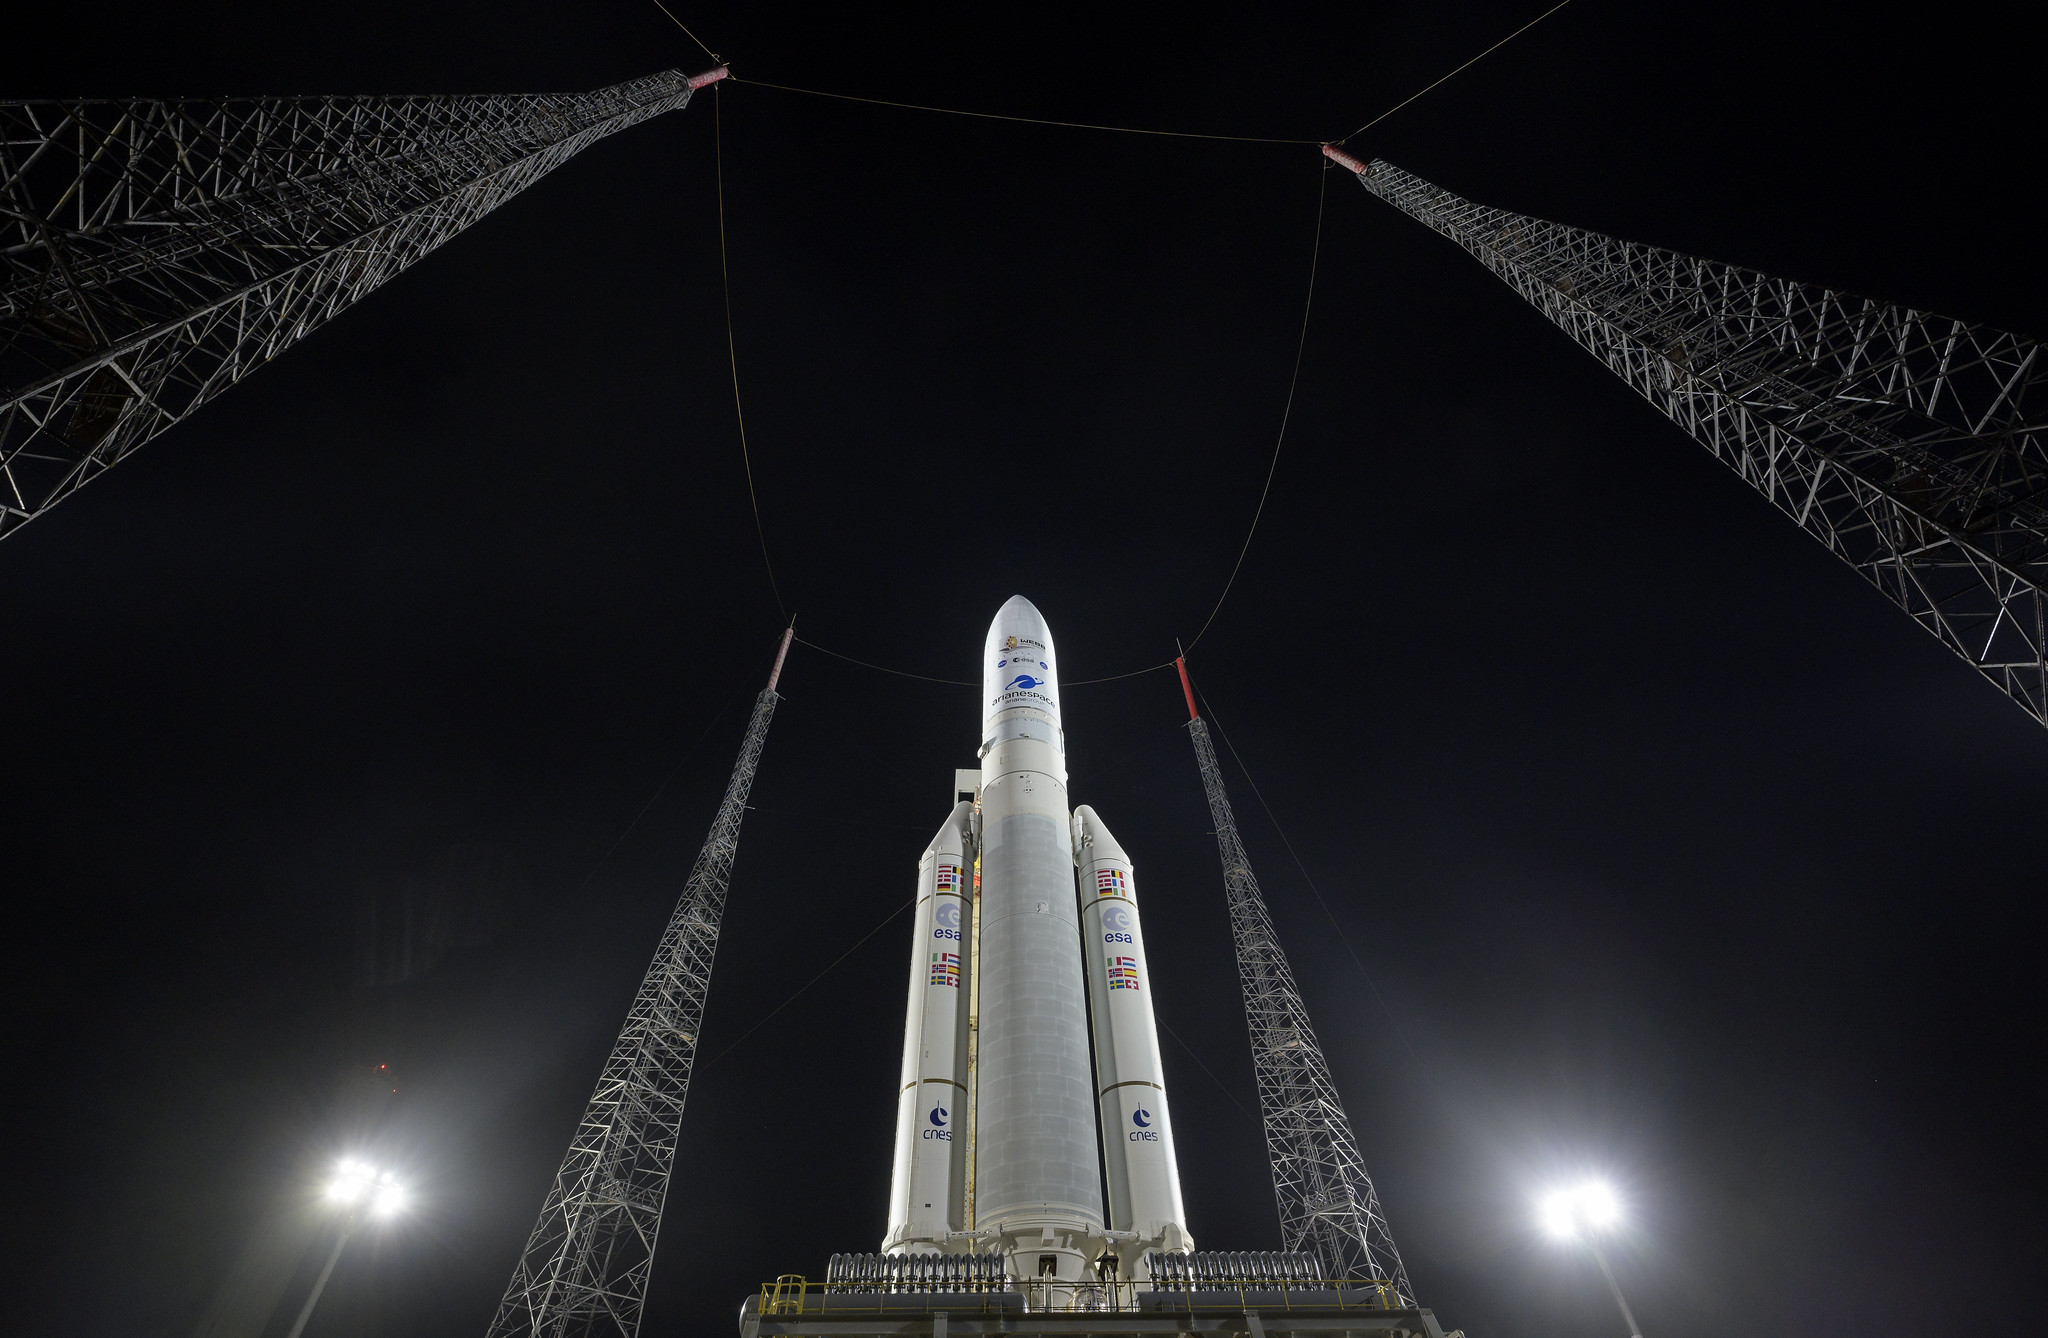 Arianespace's Ariane 5 rocket with NASA’s James Webb Space Telescope onboard, is seen at the launch pad, Thursday, Dec. 23, 2021, at Europe’s Spaceport, the Guiana Space Center in Kourou, French Guiana. 